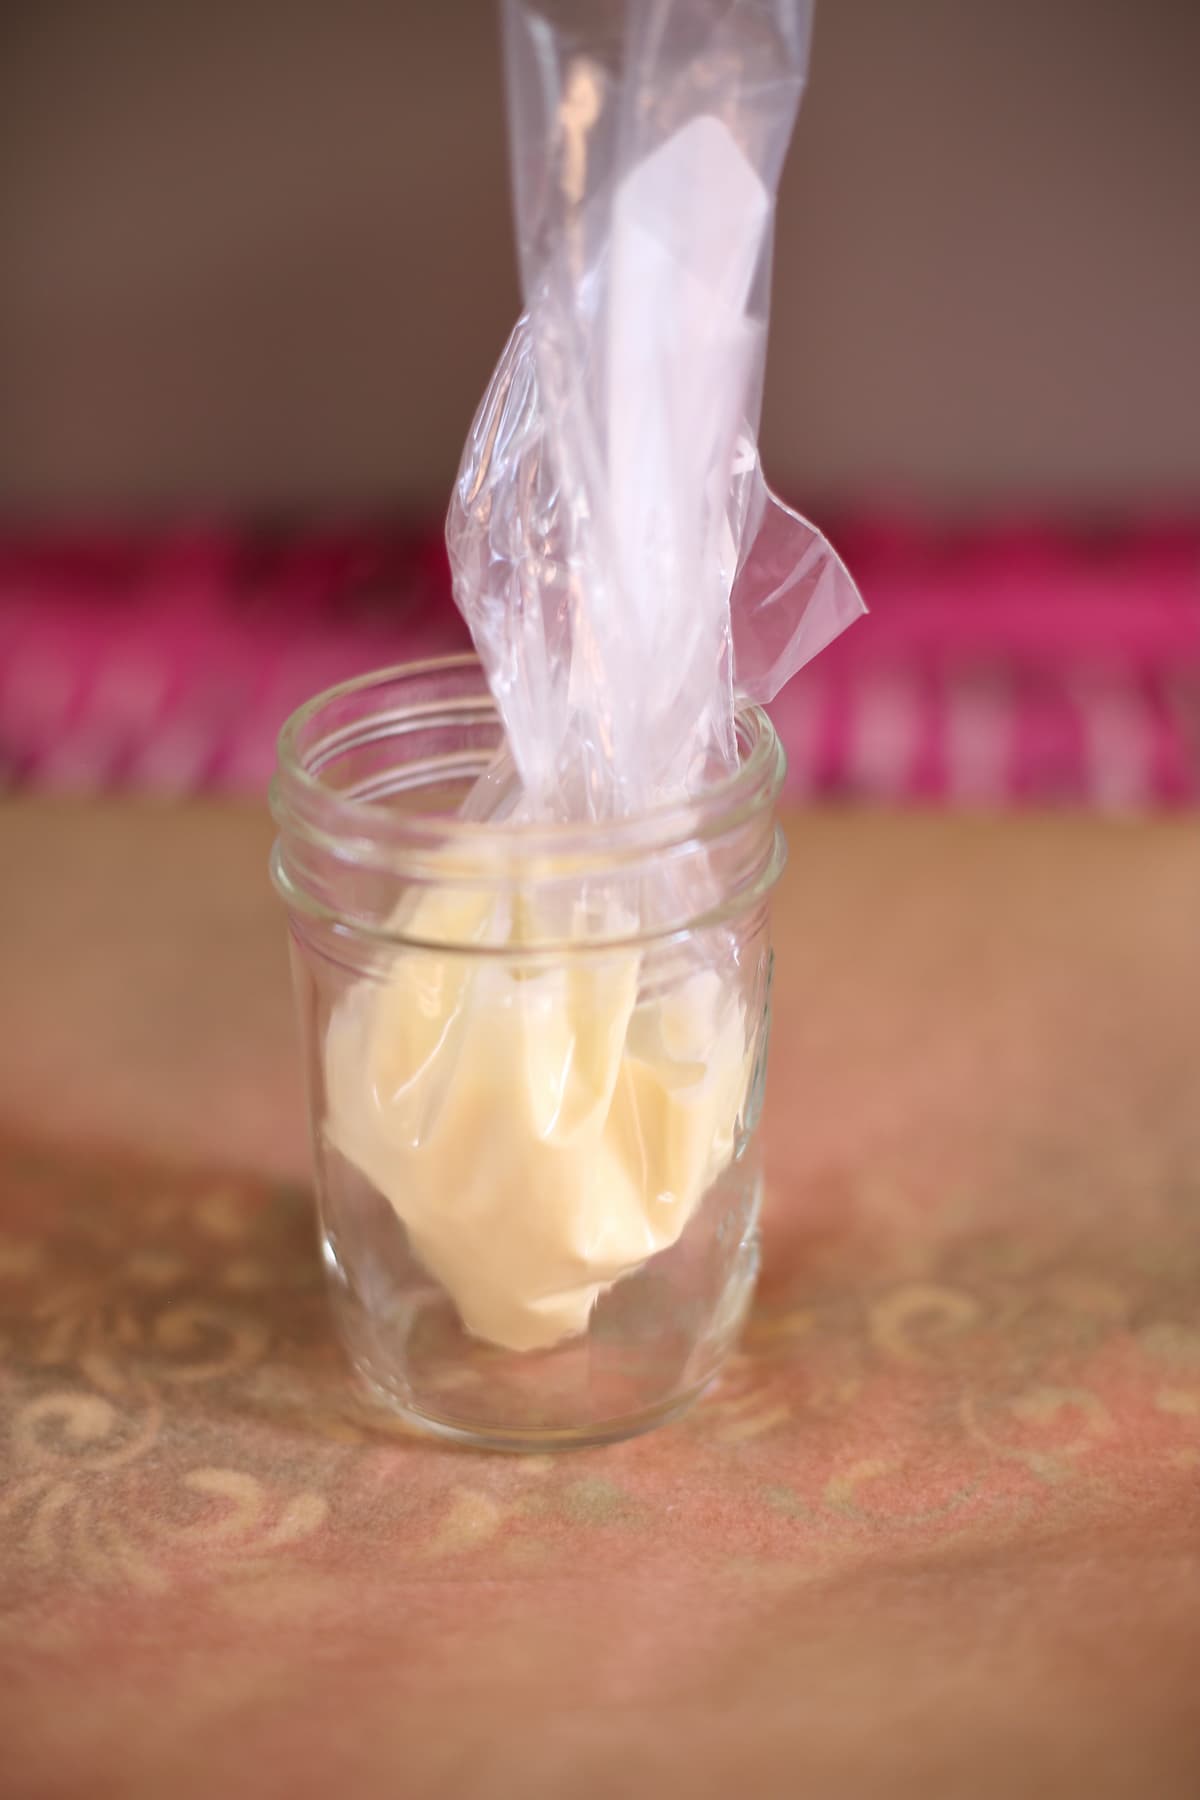 a jar of melted white chocolate on a plastic piping bag sitting on a table.